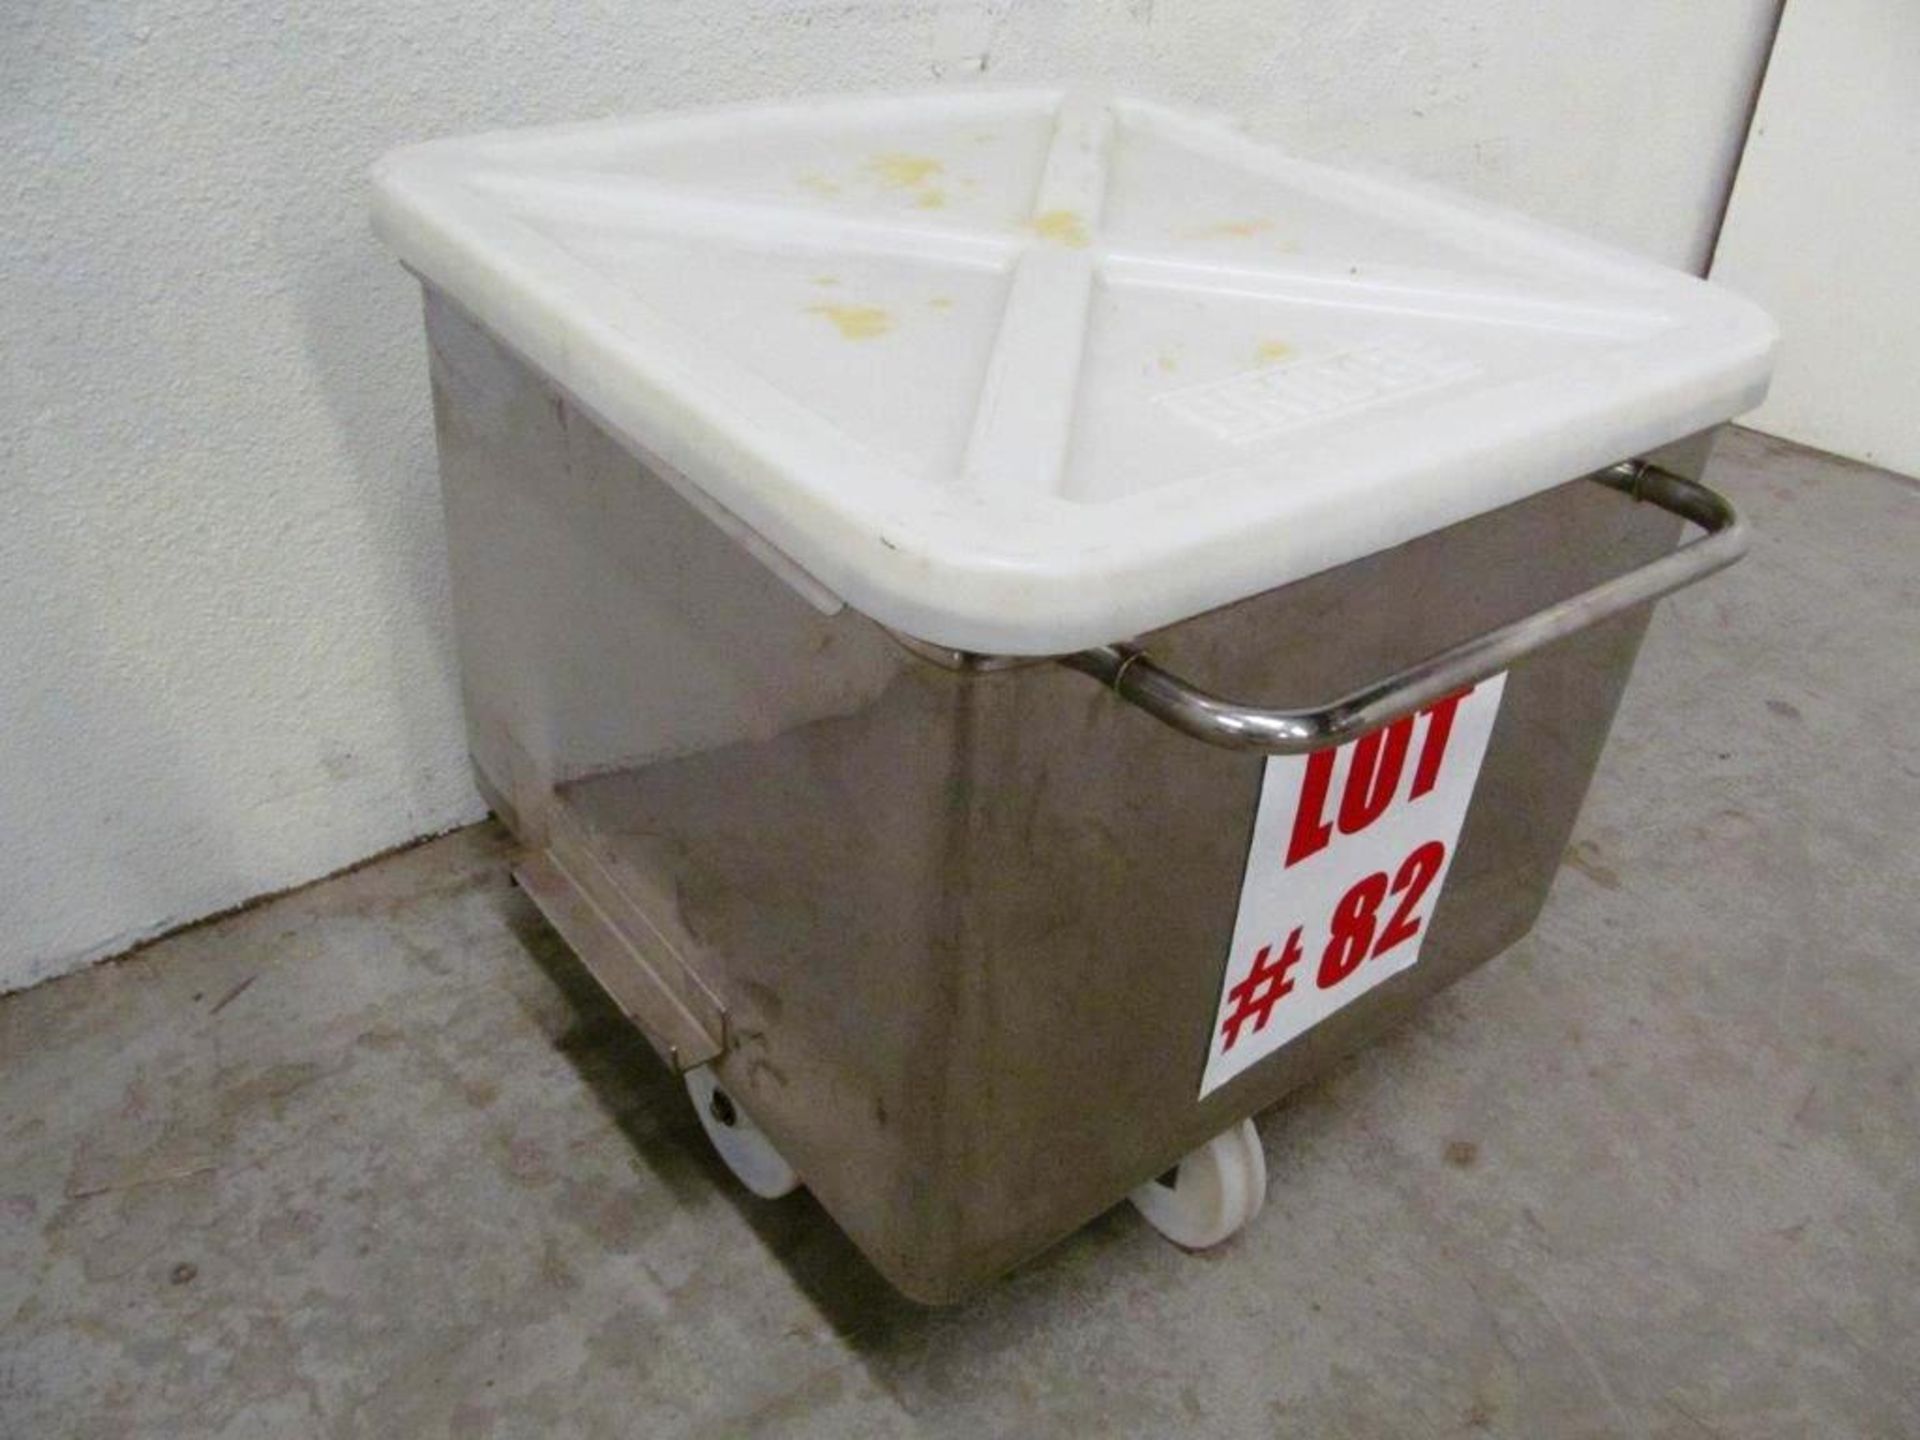 STAINLESS STEEL ROLL AROUND CART ON CASTERS, C/W S/S PLASTIC COVERS, 26'' X 27'' X 20'' DEEP X 27